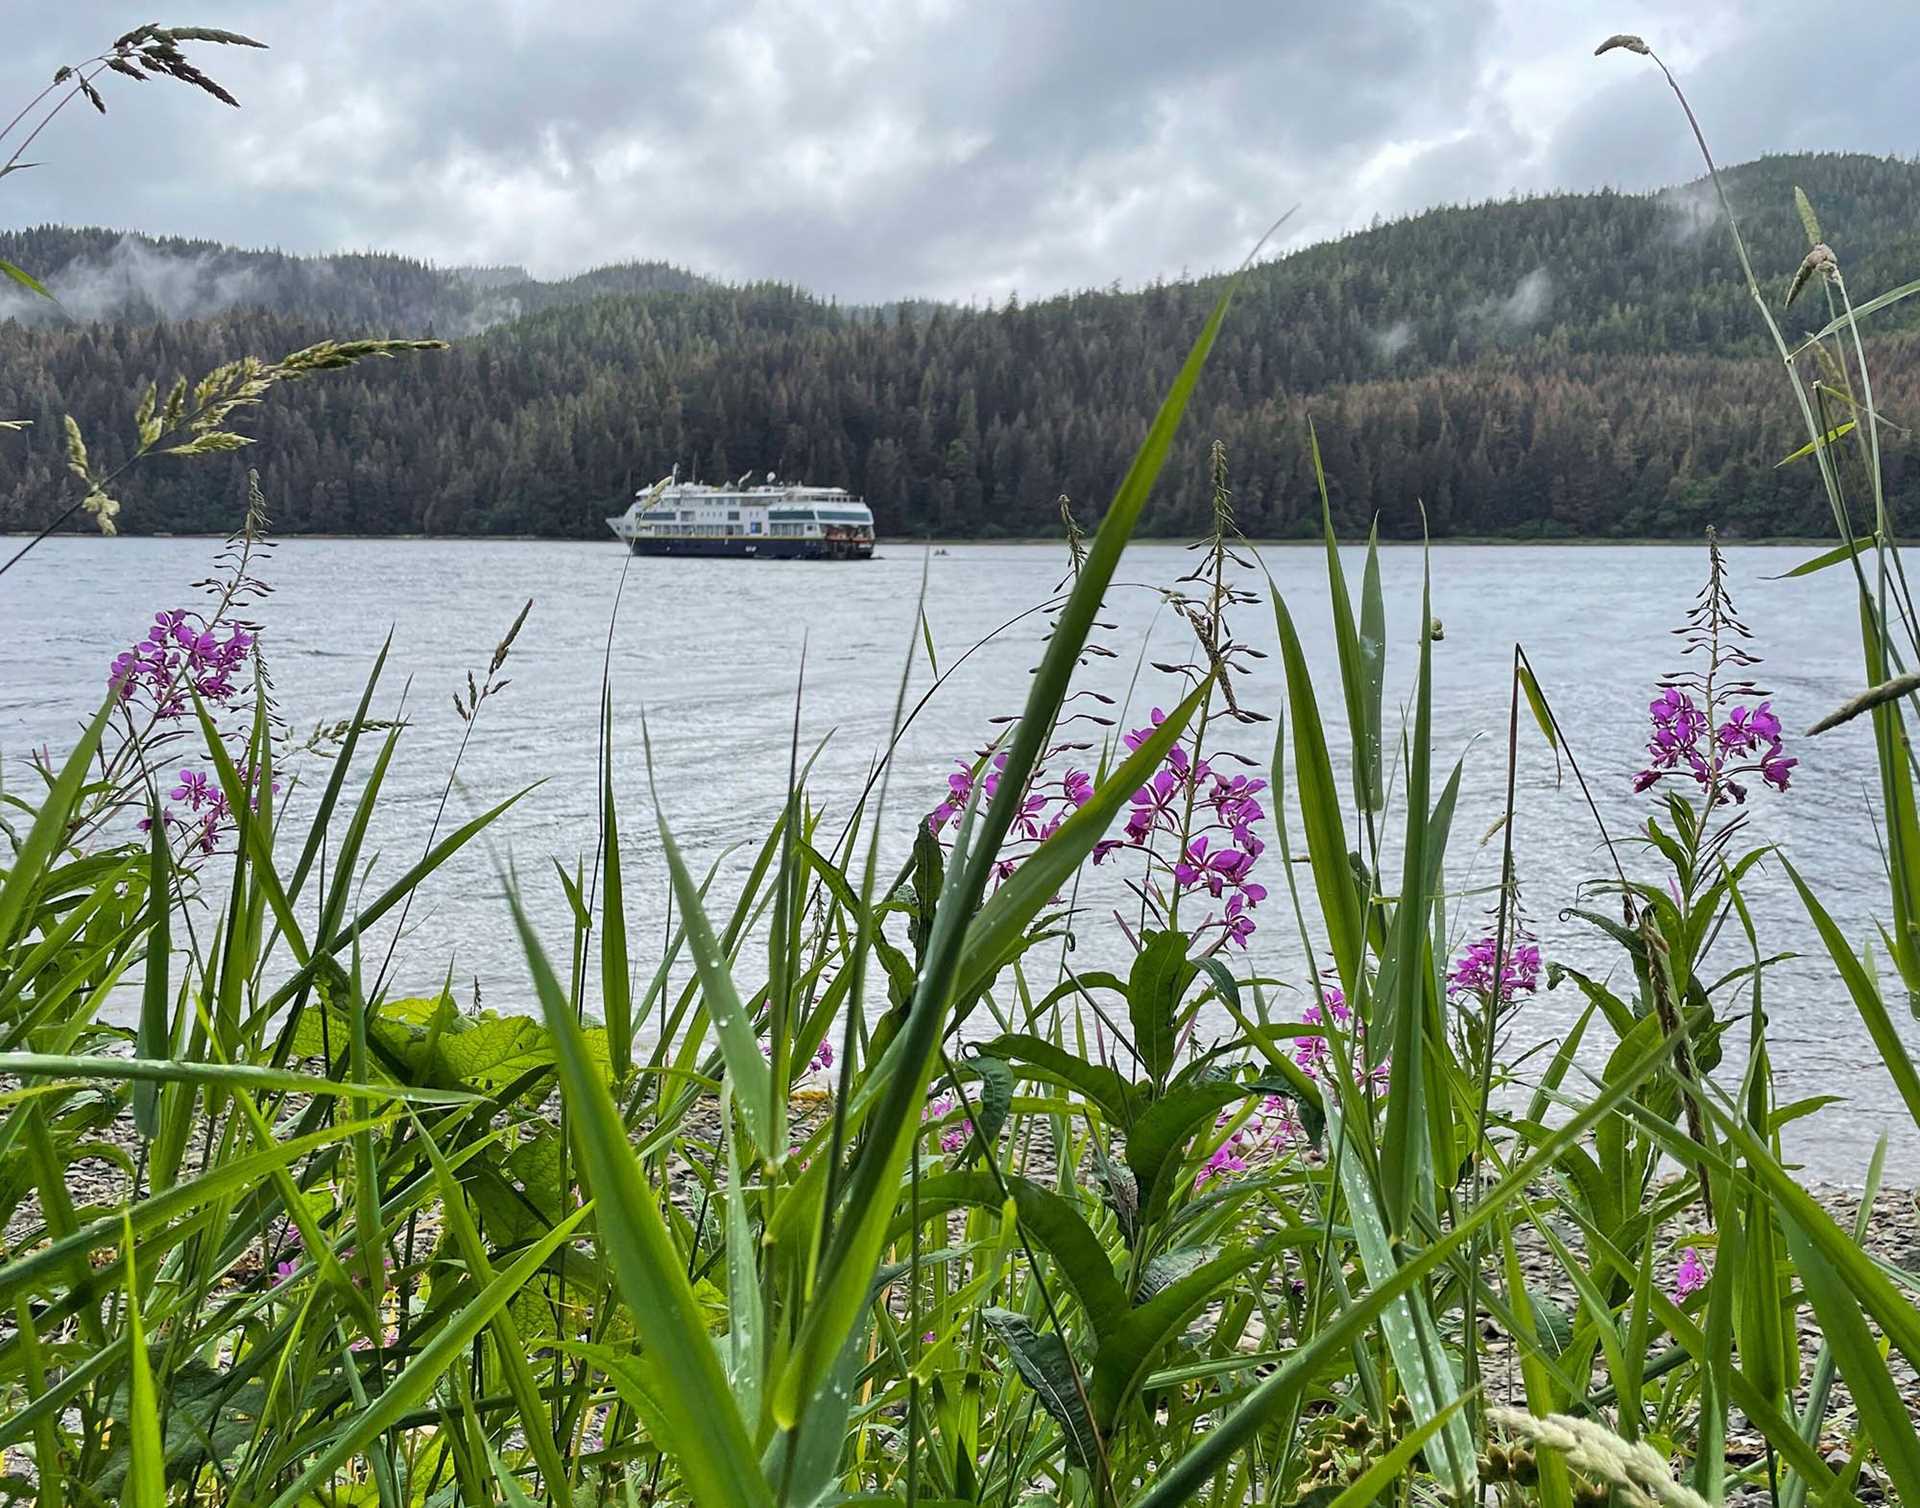 purple flowers on shoreline with a ship in the distance